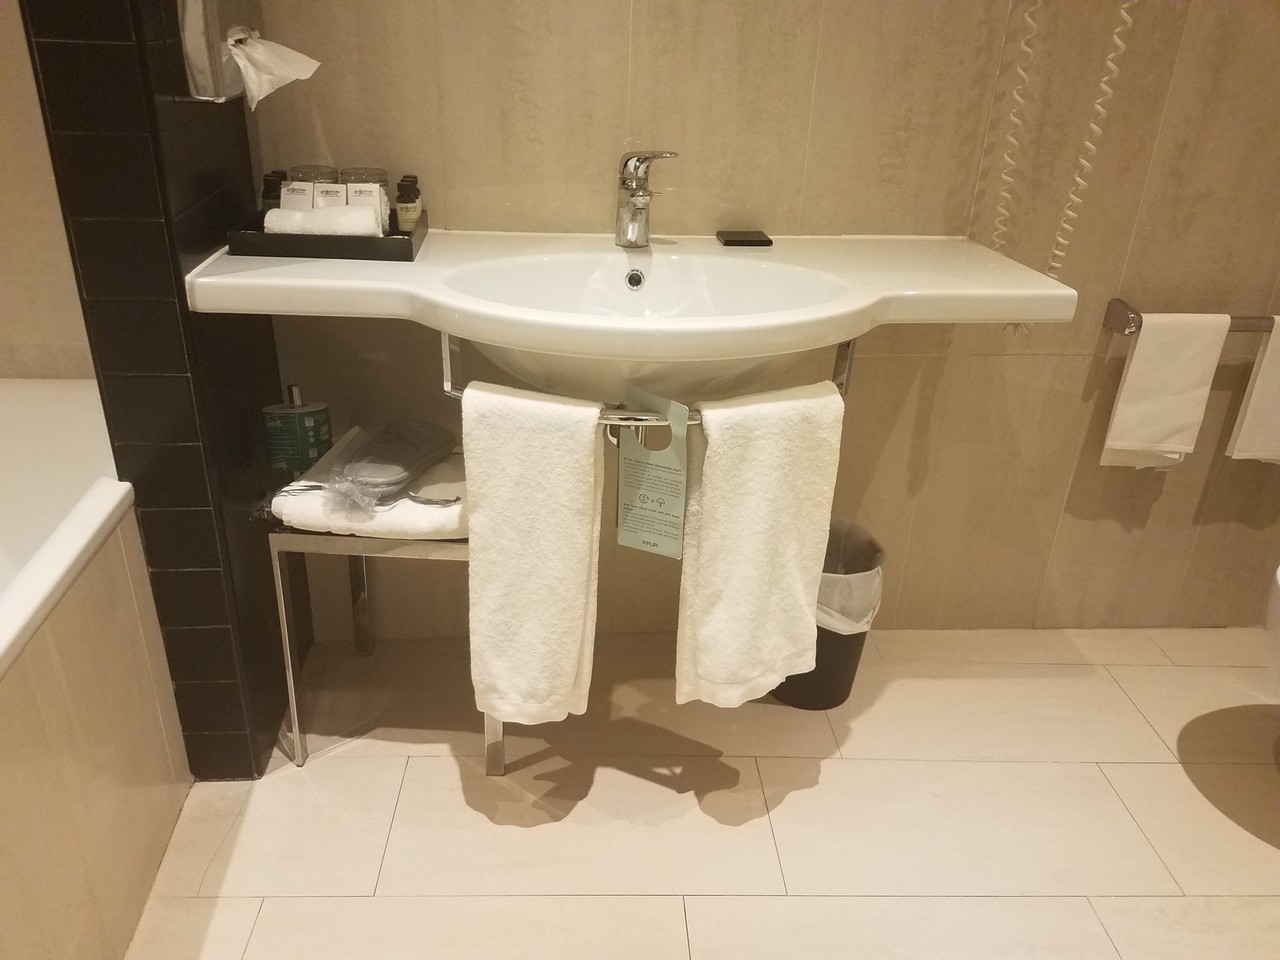 a sink with towels from it